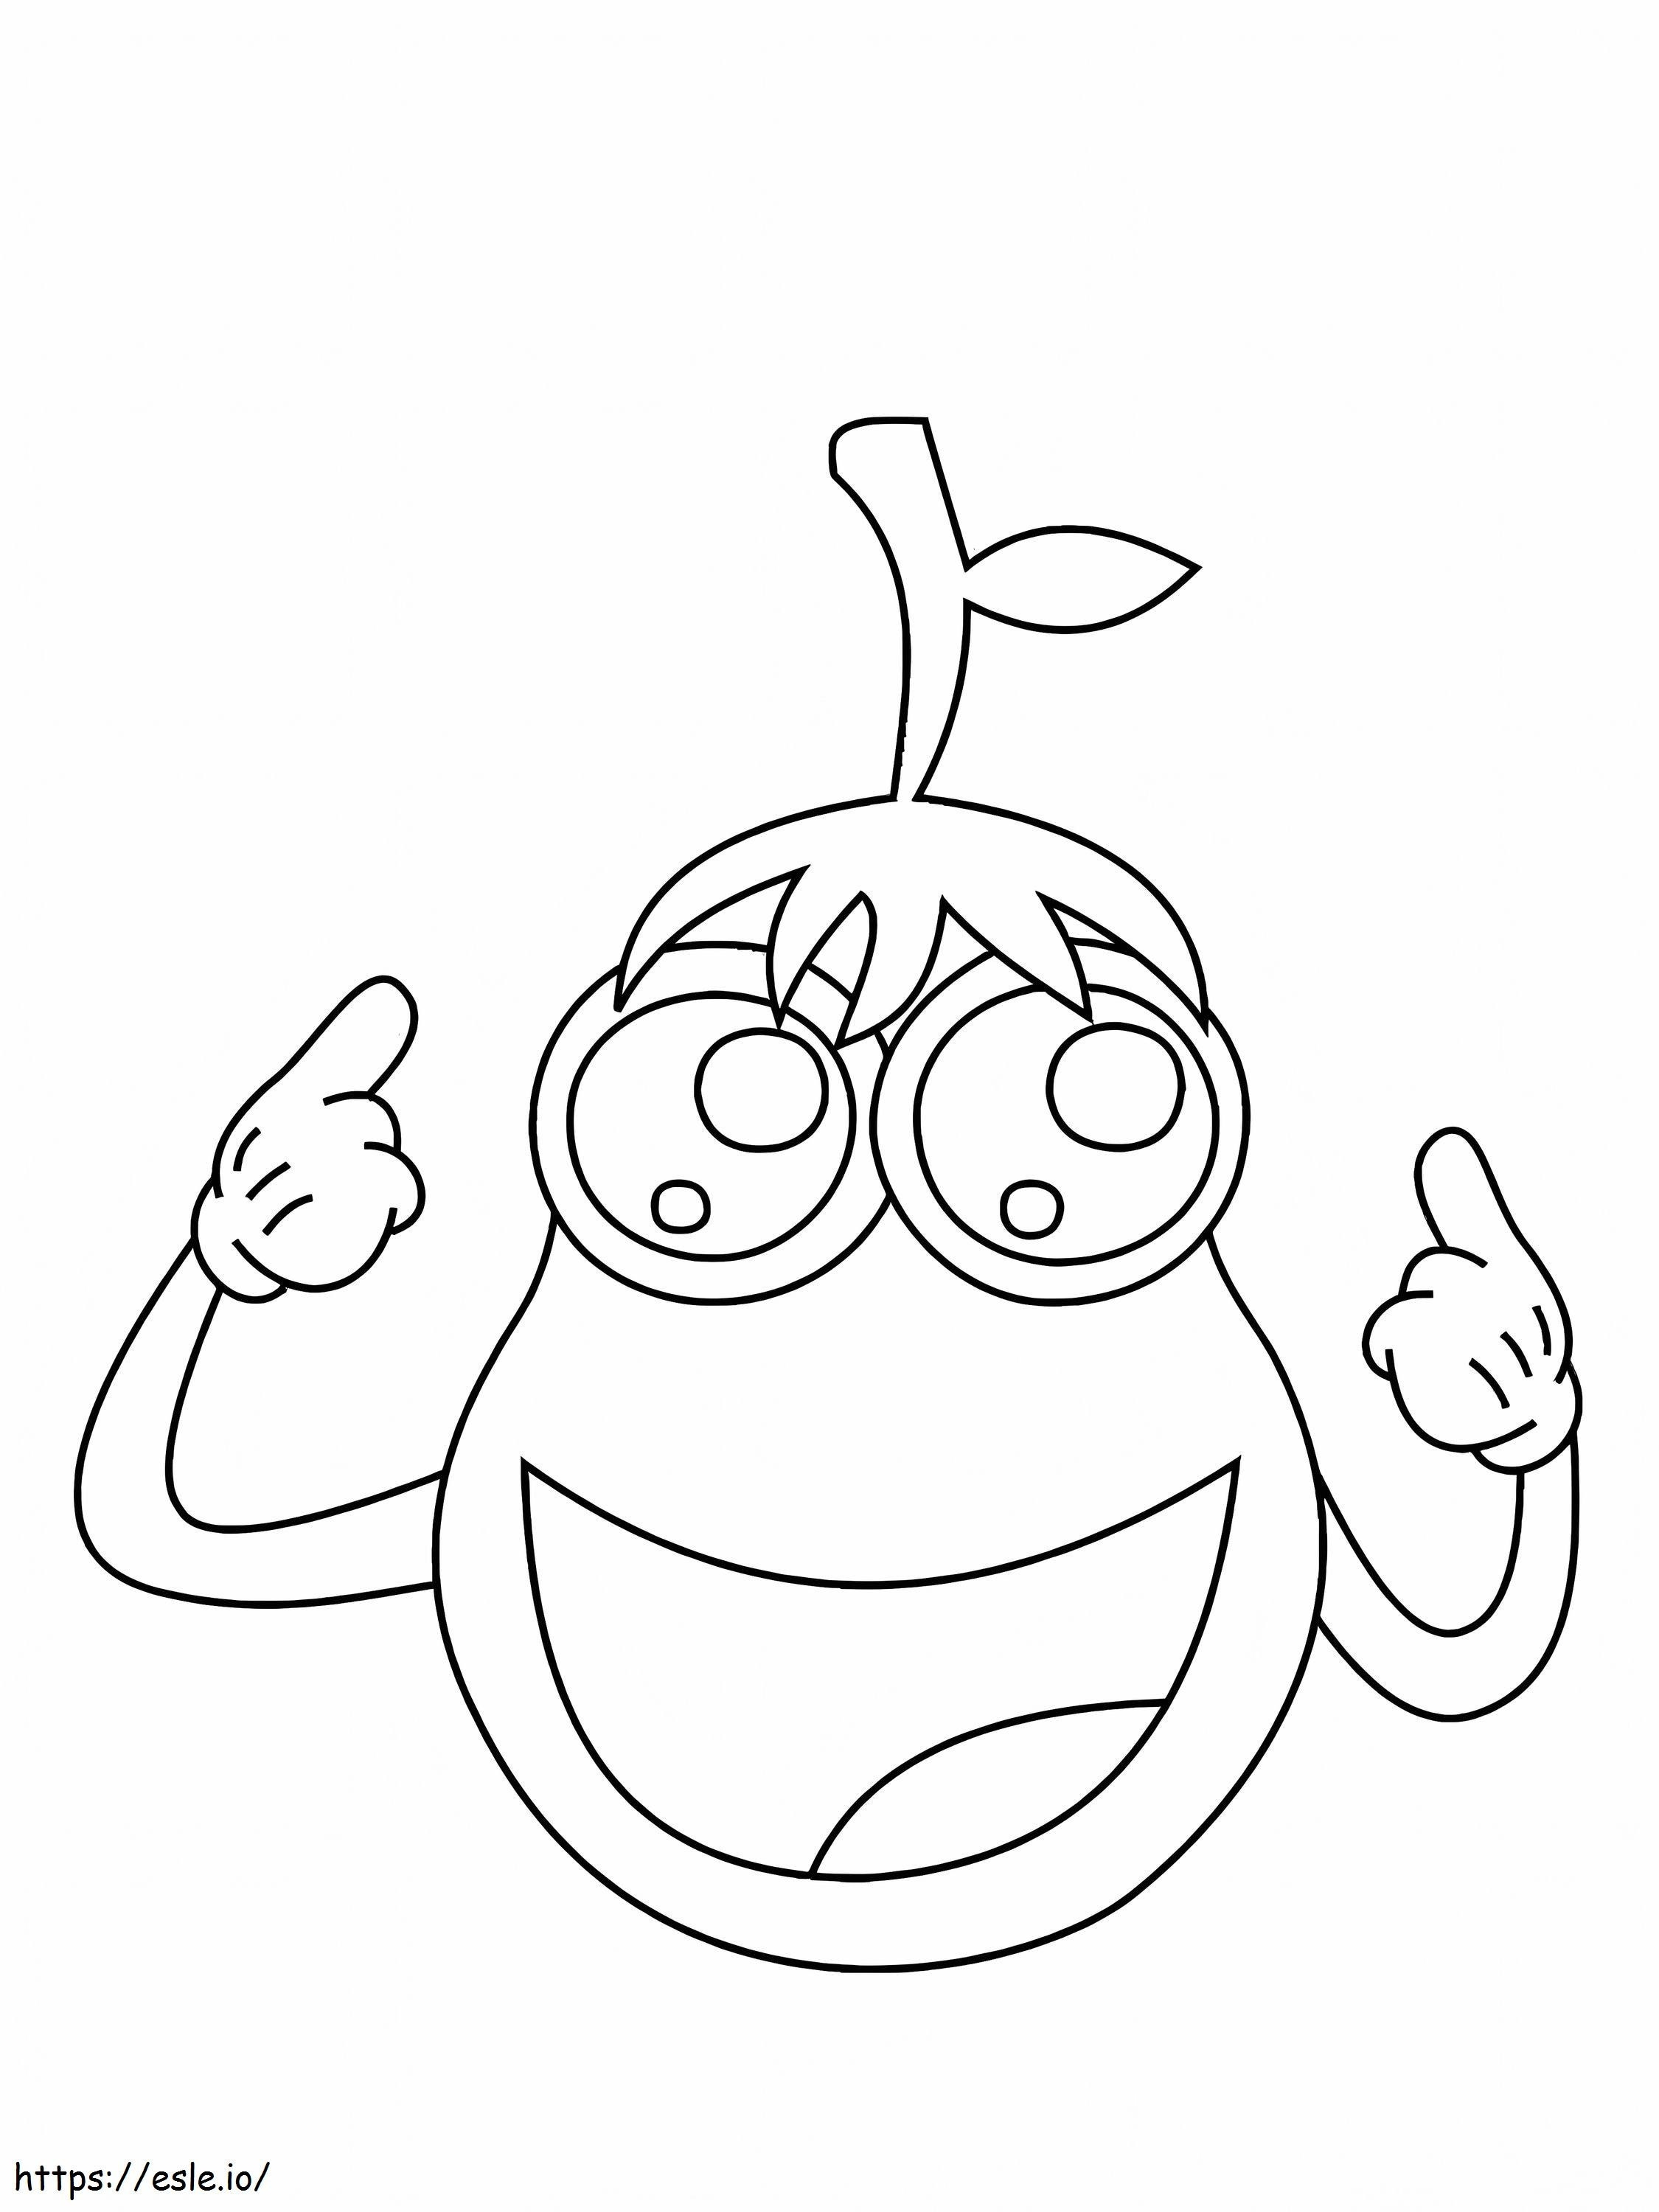 Funny Eggplant coloring page